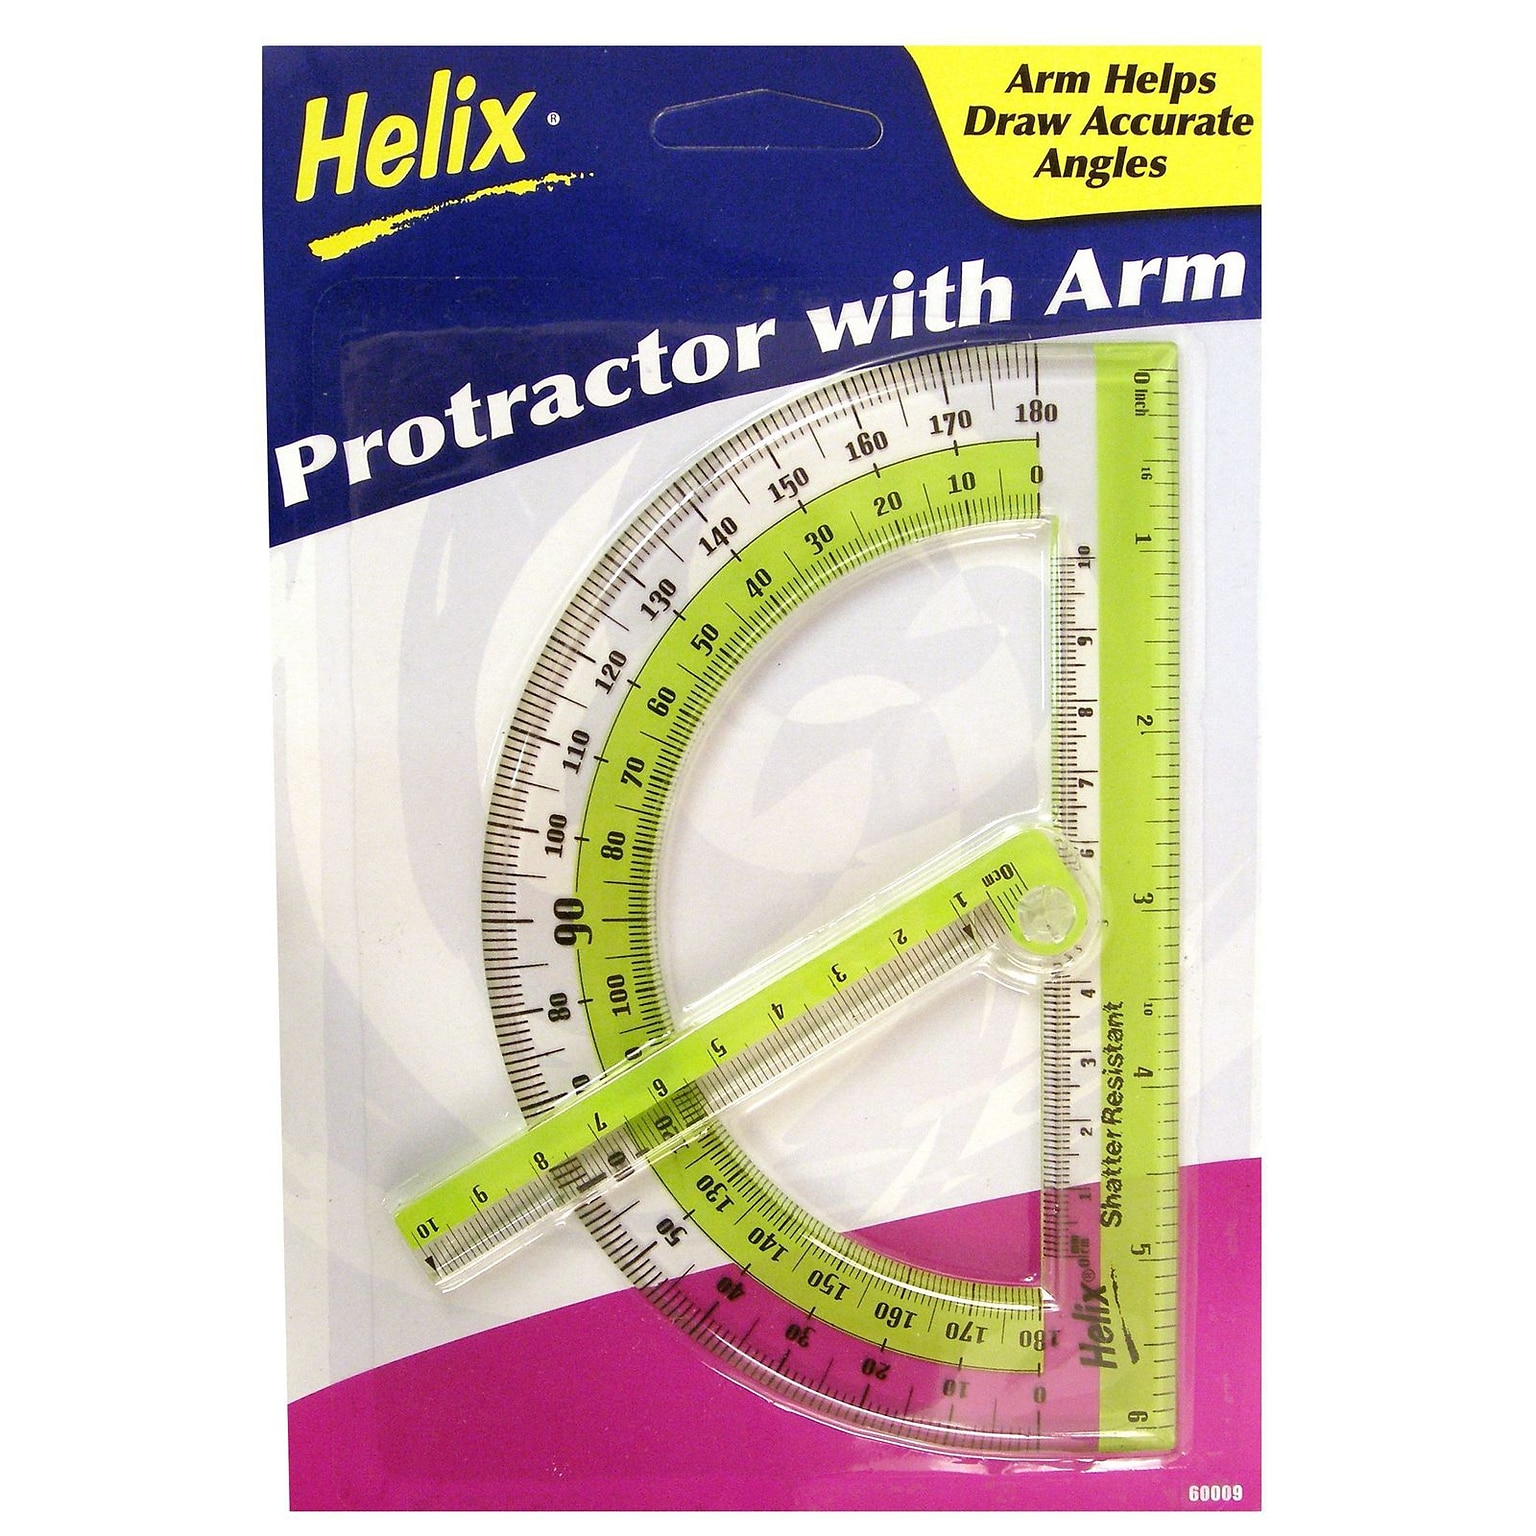 Helix Protractor With Swing Arm Protractor [Pack Of 12] (12PK-60009)